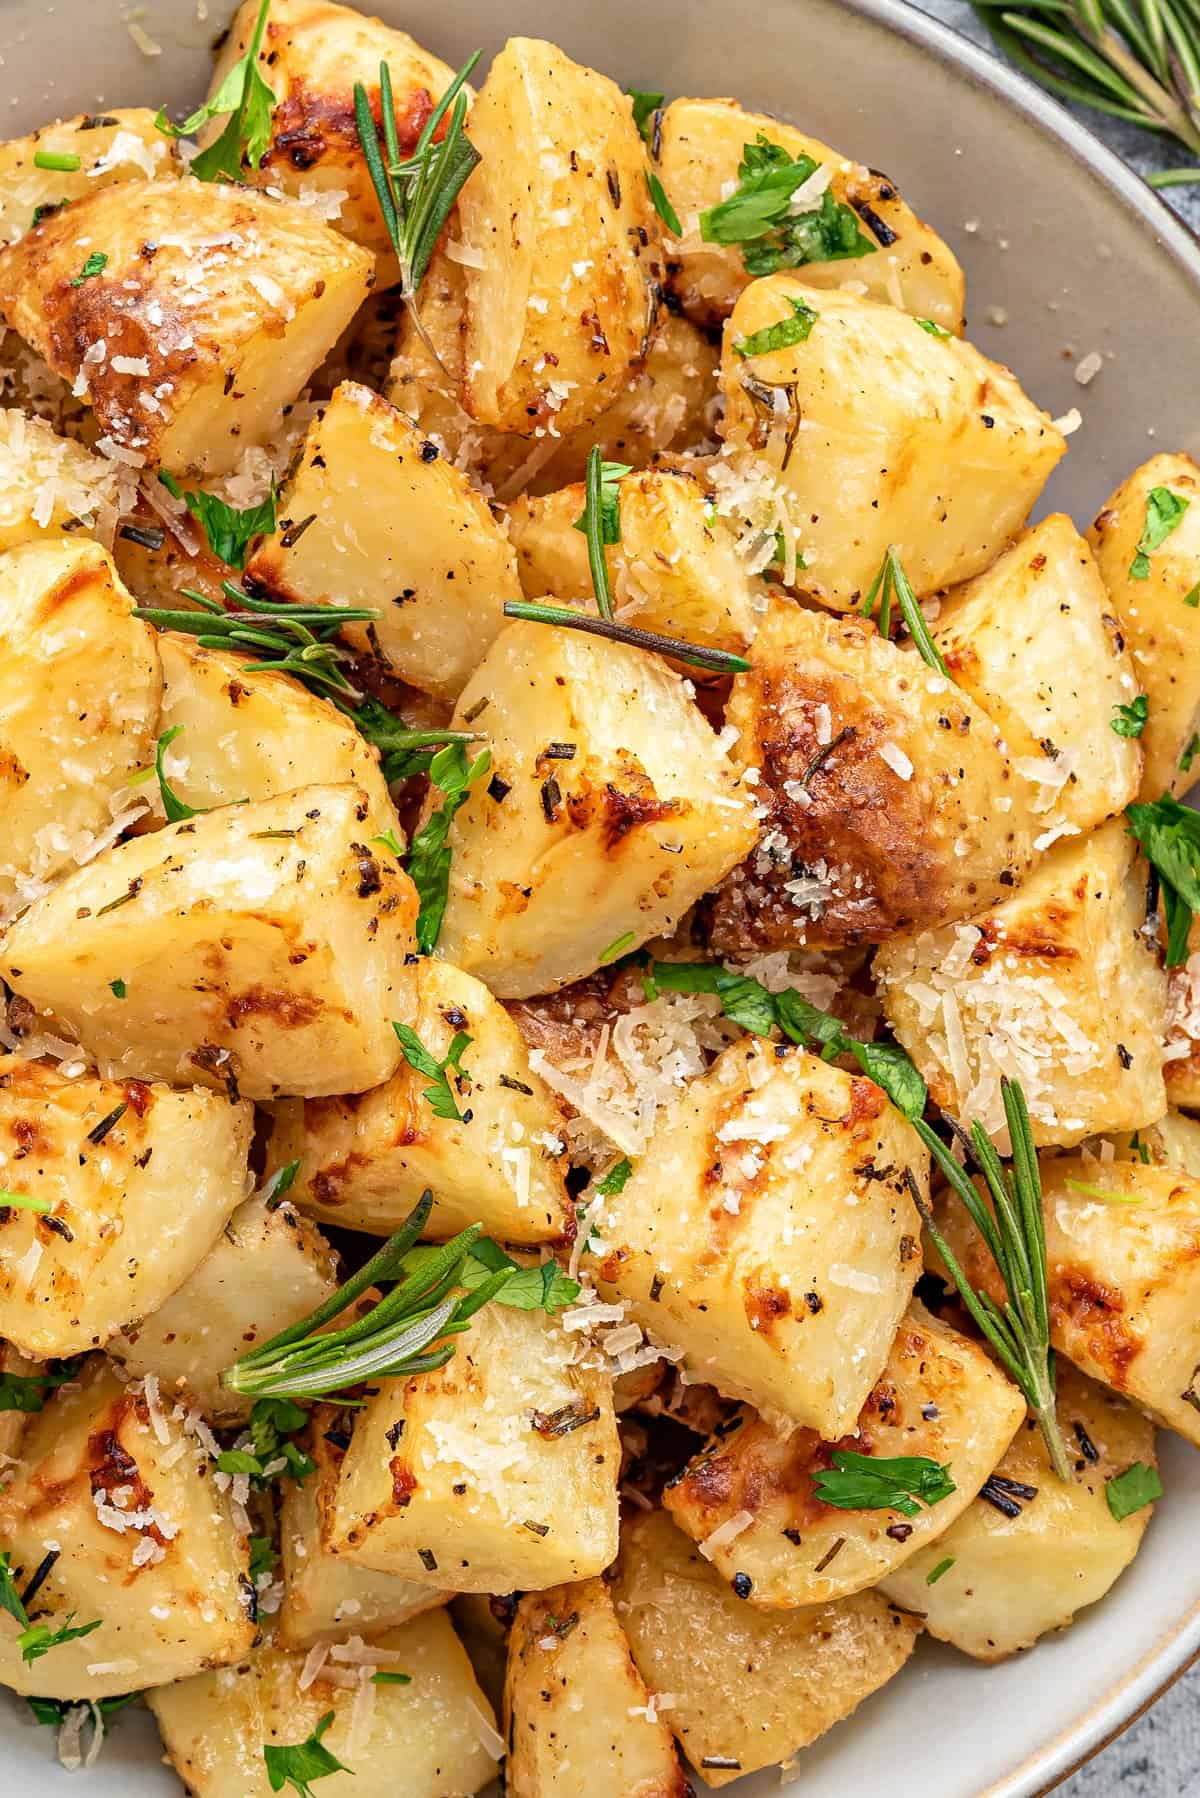 Close-up of parmesan rosemary roasted potatoes in a bowl garnished with fresh rosemary.